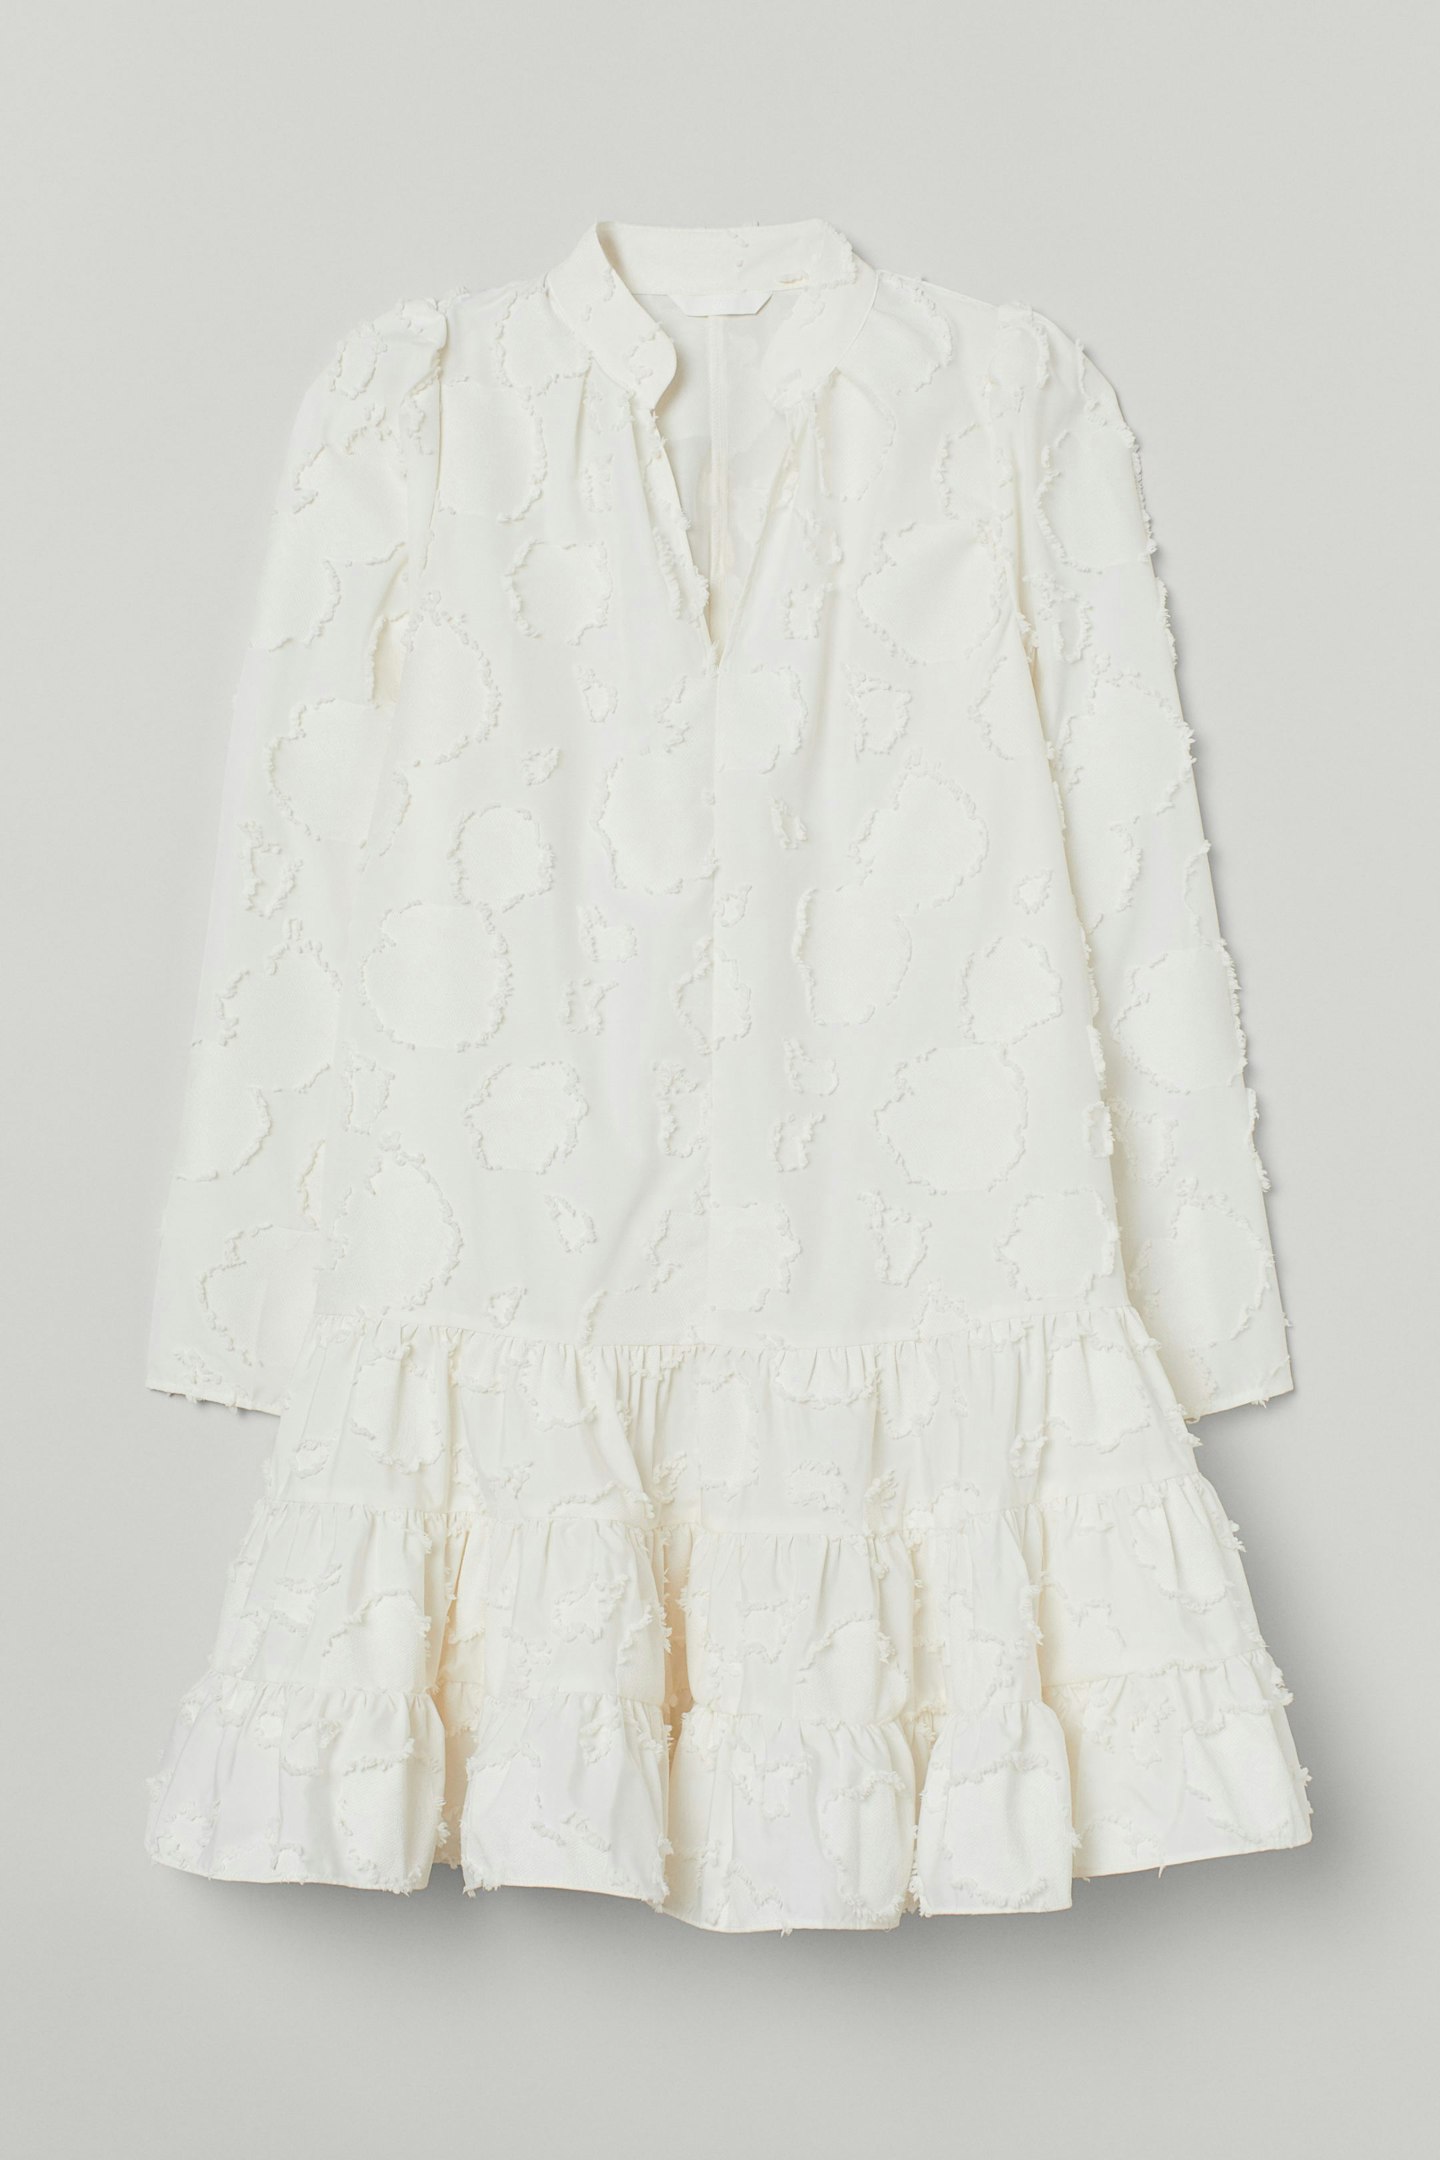 H&M New Sustainable Dress Collection | Fashion | Grazia